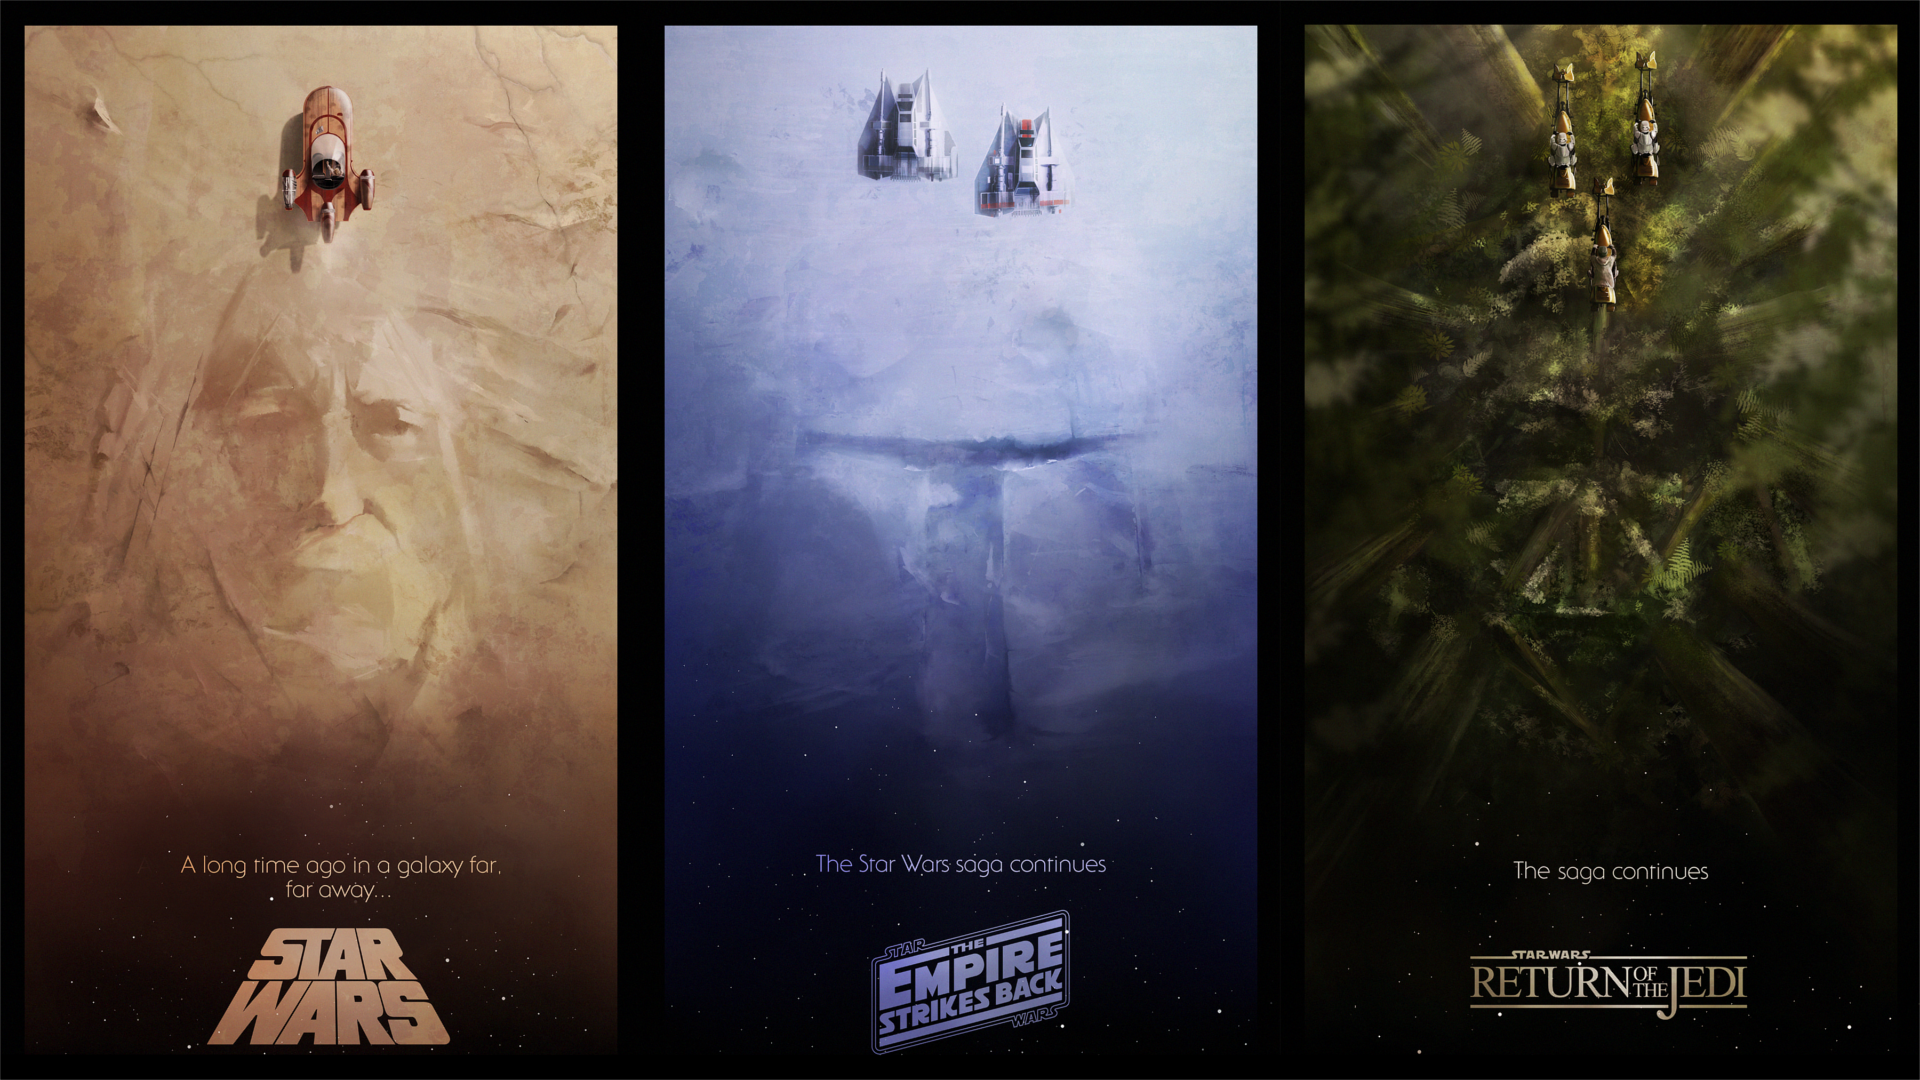 Star Wars Collage The Empire Strikes Back Star Wars Return Of The Jedi Science Fiction Artwork 1920x1080